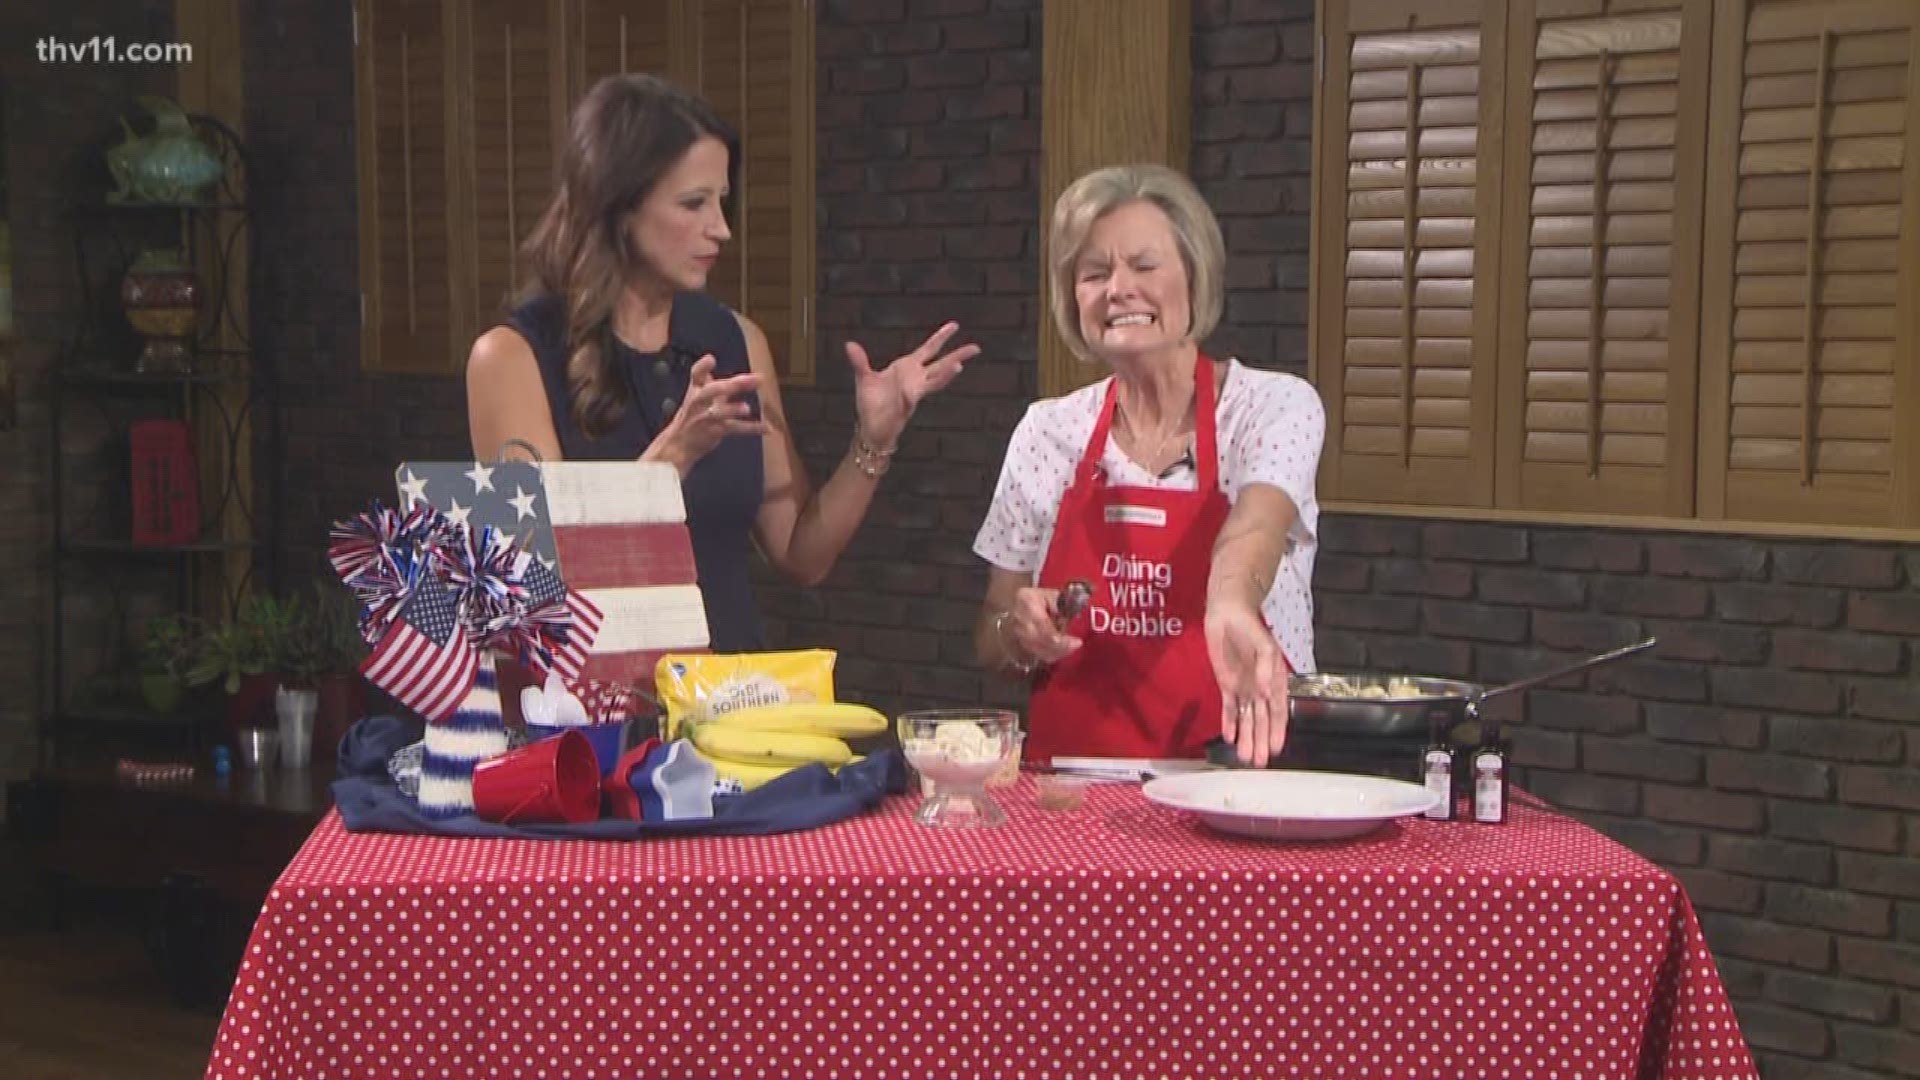 Debbie Arnold shows us how to make Easy Bananas Foster.